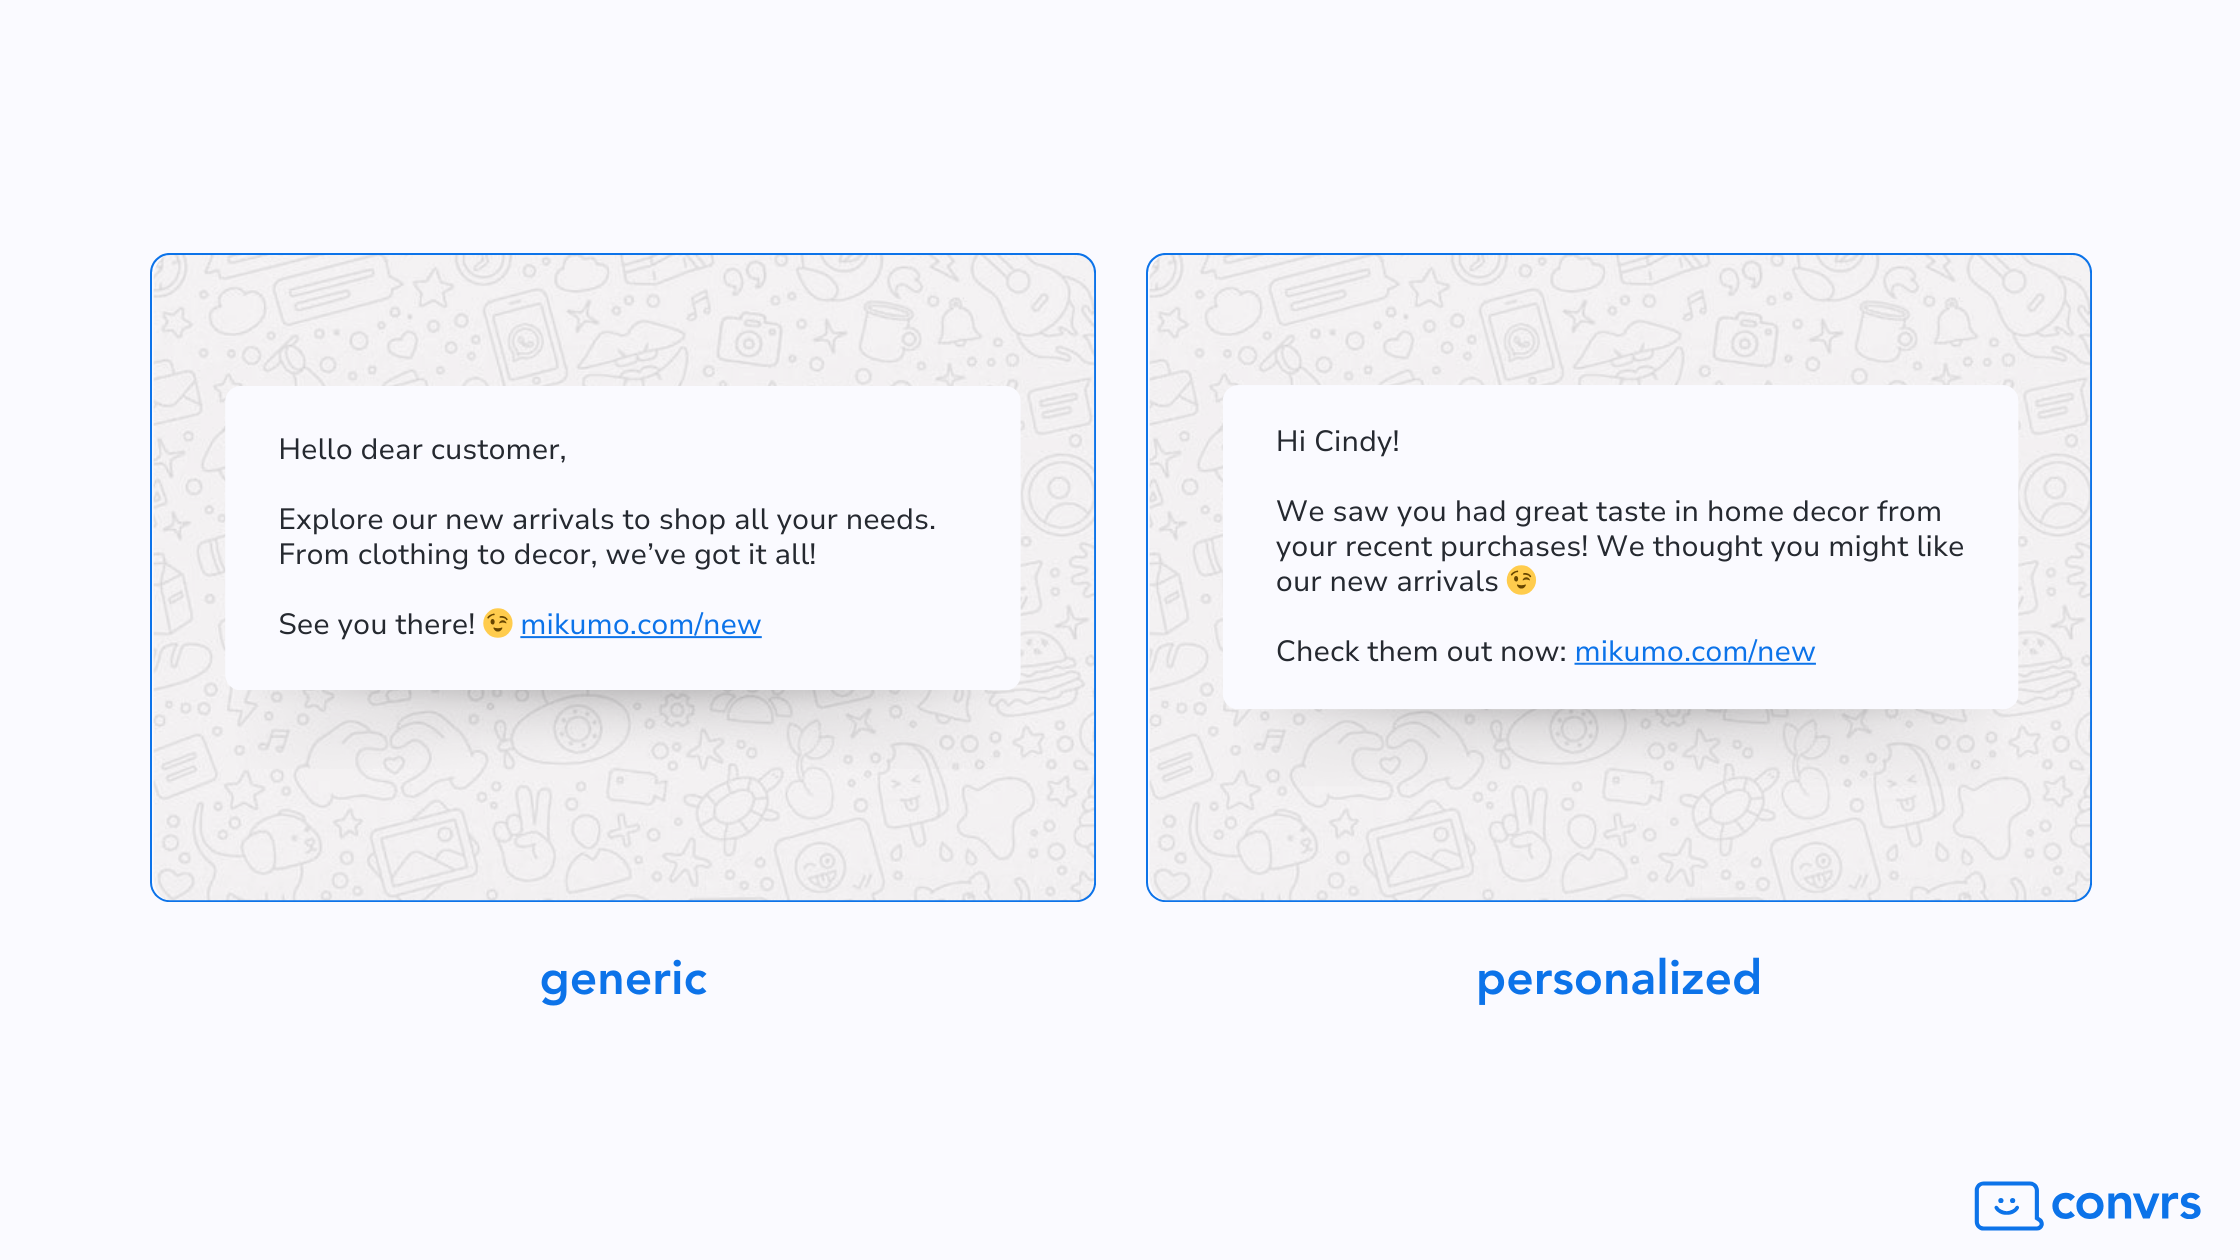 Visual comparing a generic message versus a personalized message